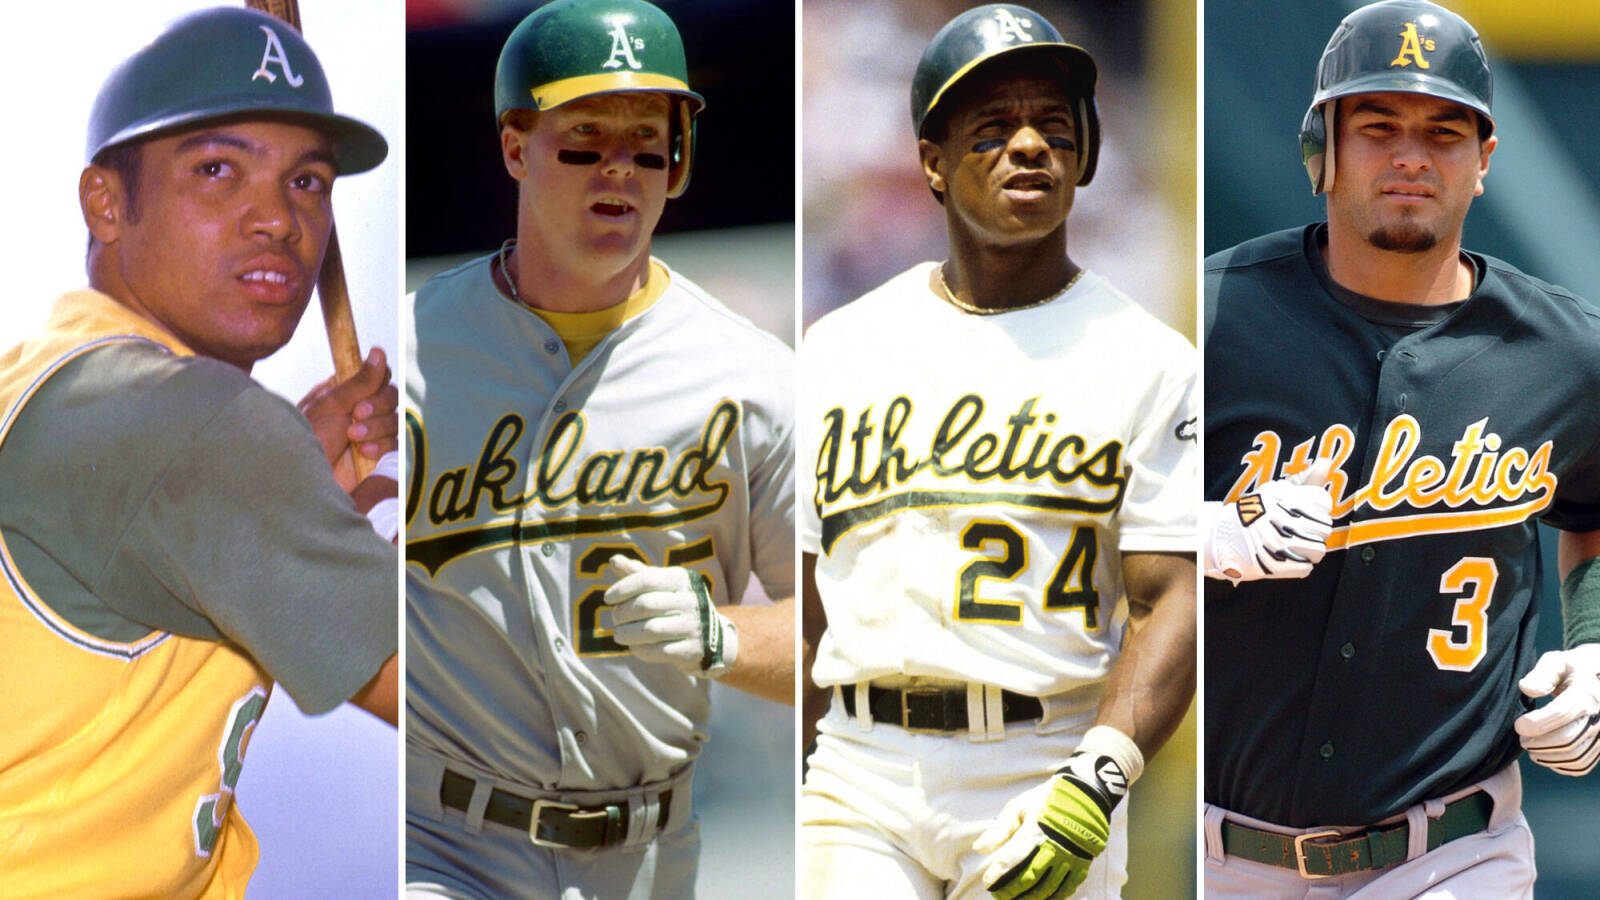 Heritage Uniforms and Jerseys and Stadiums - NFL, MLB, NHL, NBA, NCAA, US  Colleges: Oakland Athletics Uniform and Team History